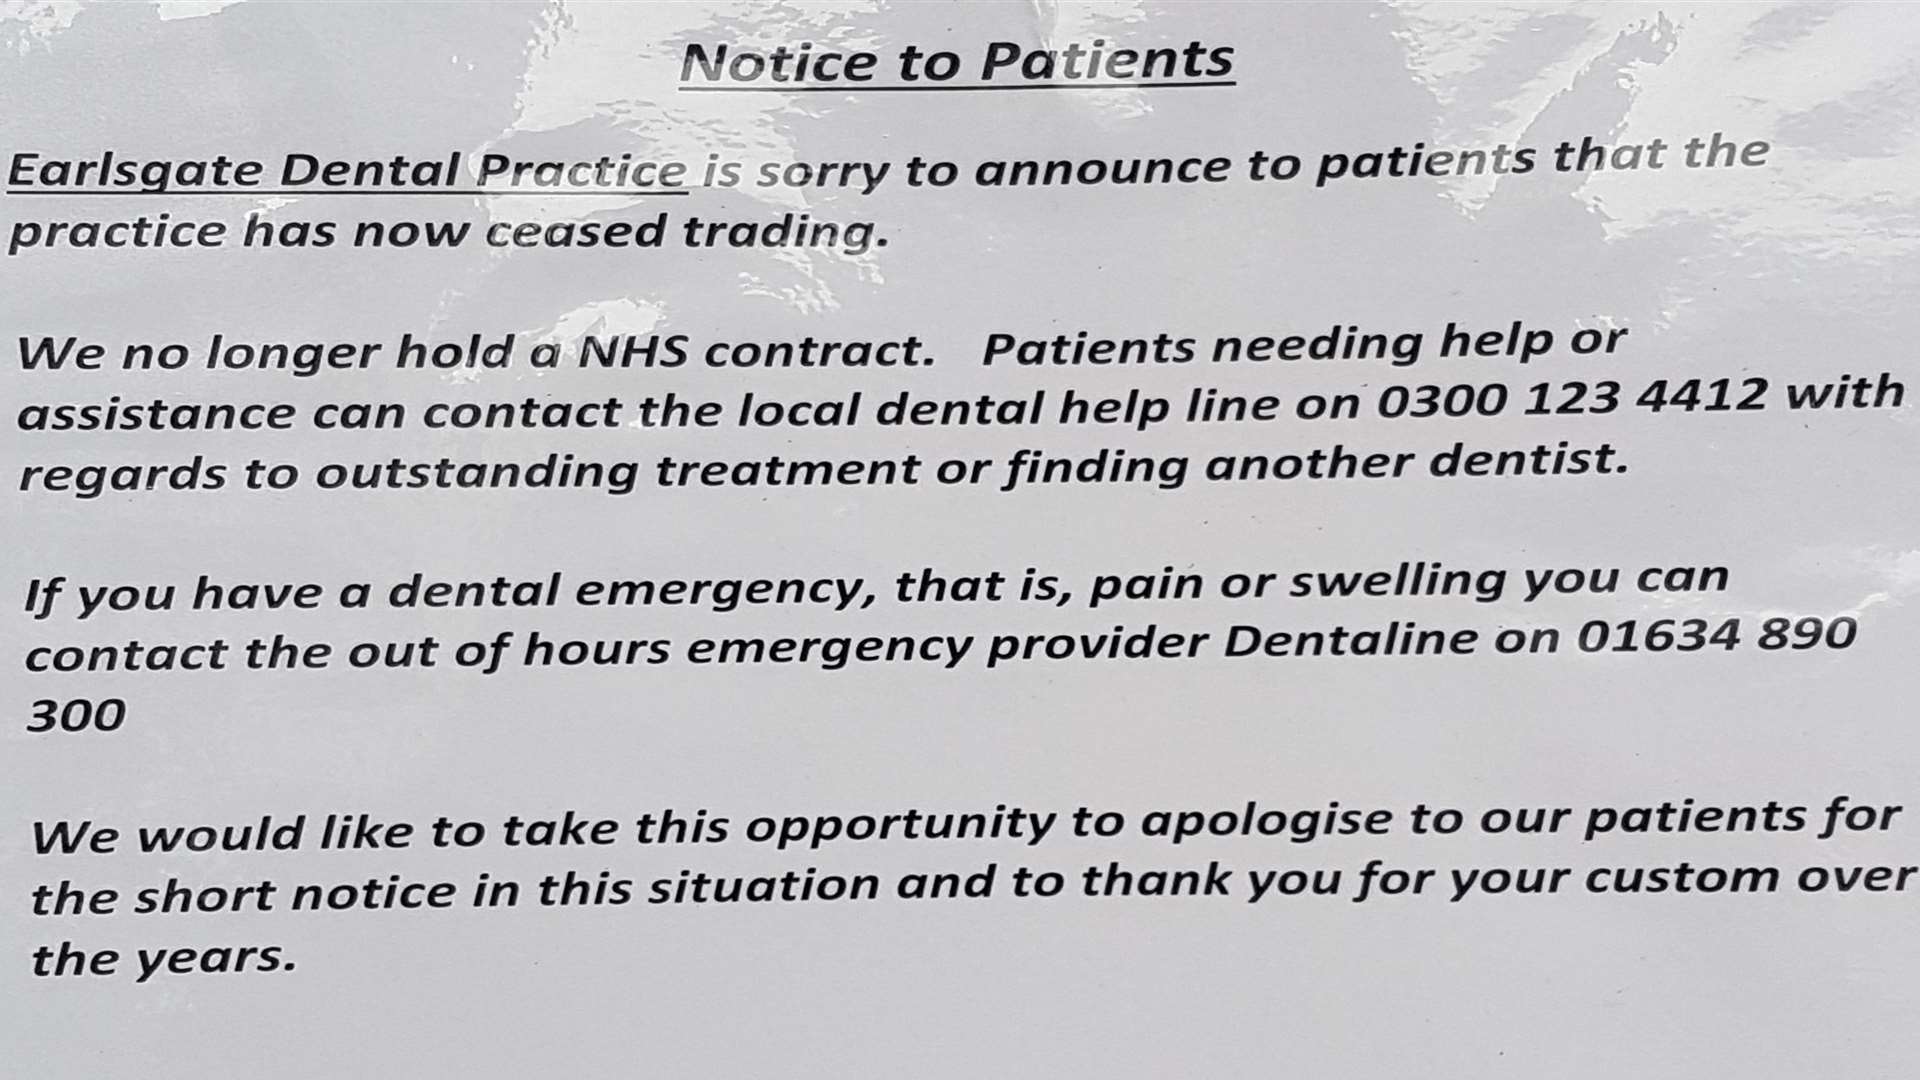 A notice left for patients